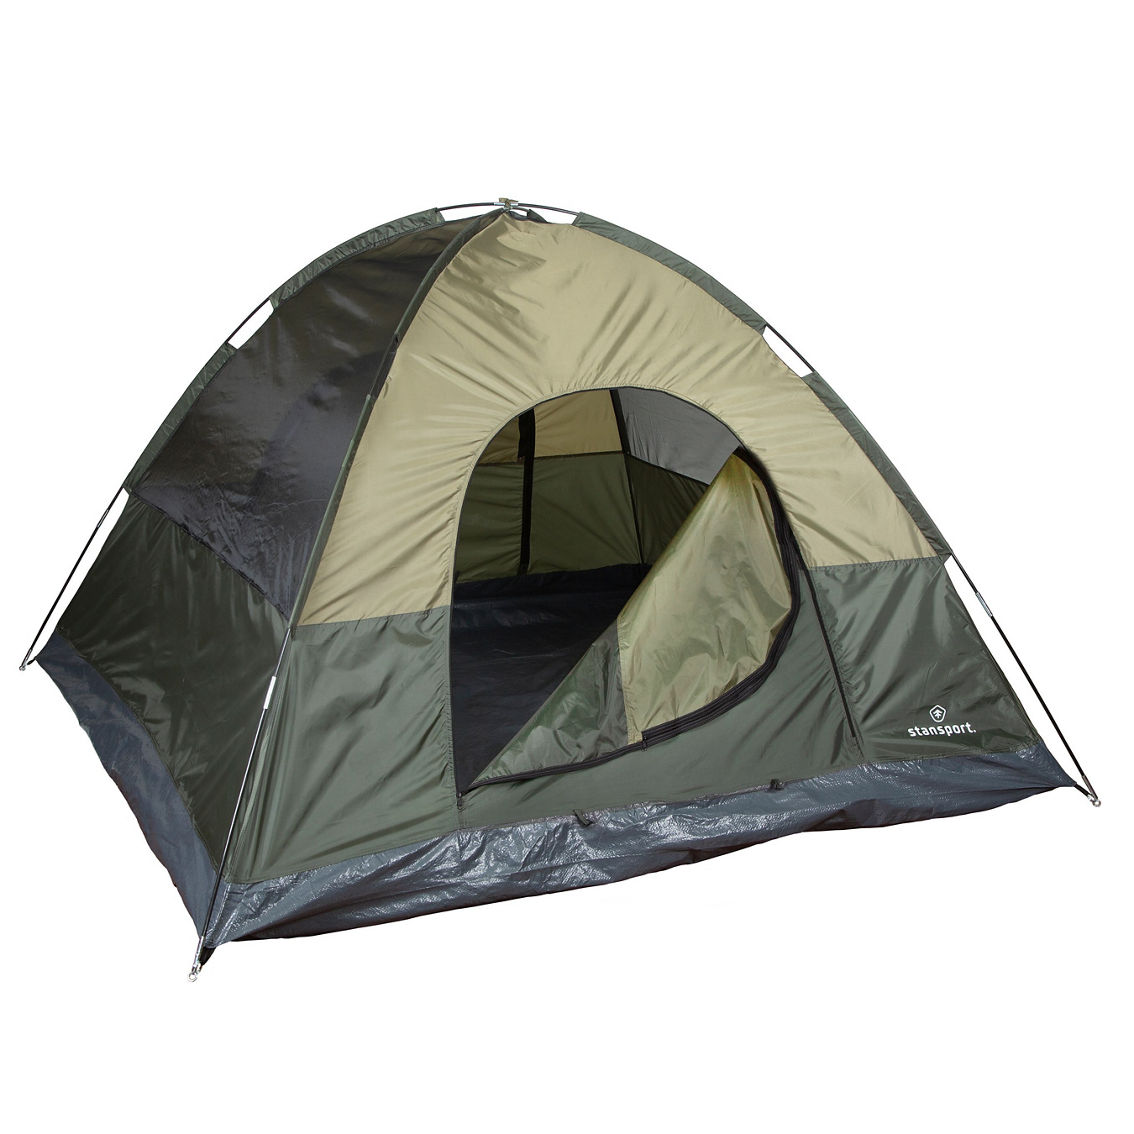 Stansport Trophy Hunter Dome Tent - Image 2 of 5